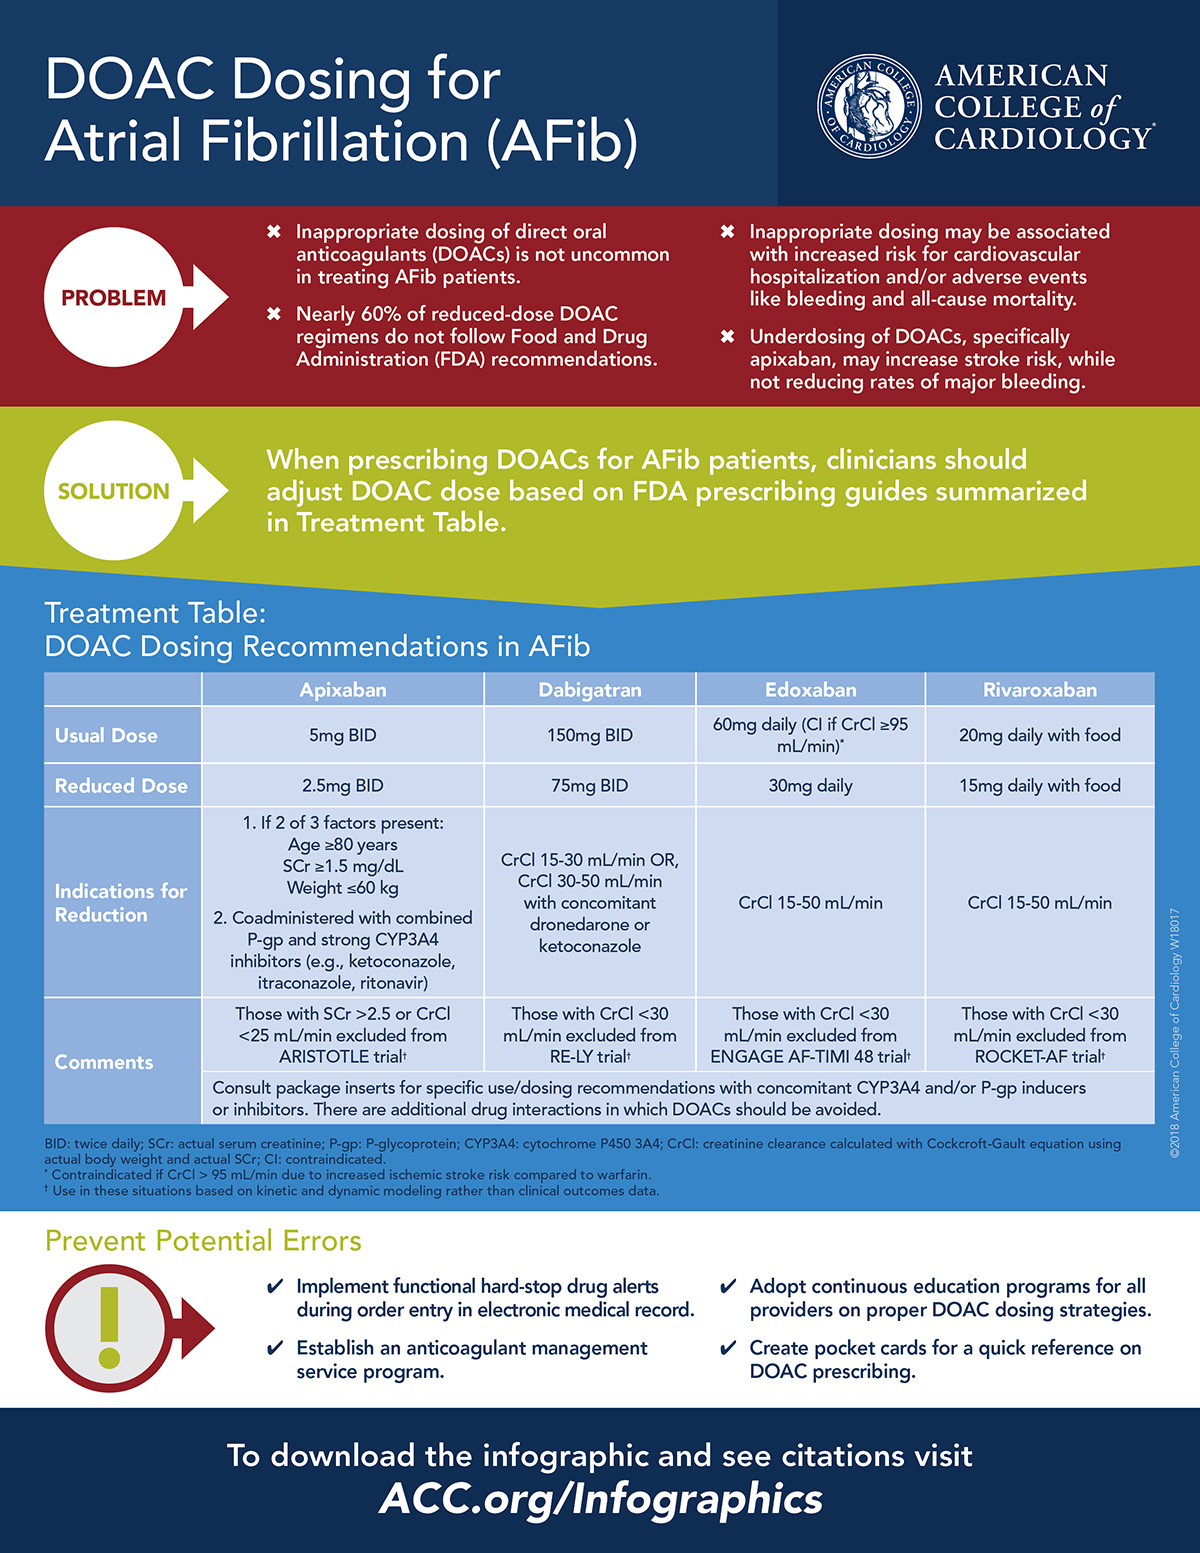 DOAC Dosing For AFib Infographic Now Available - American College of